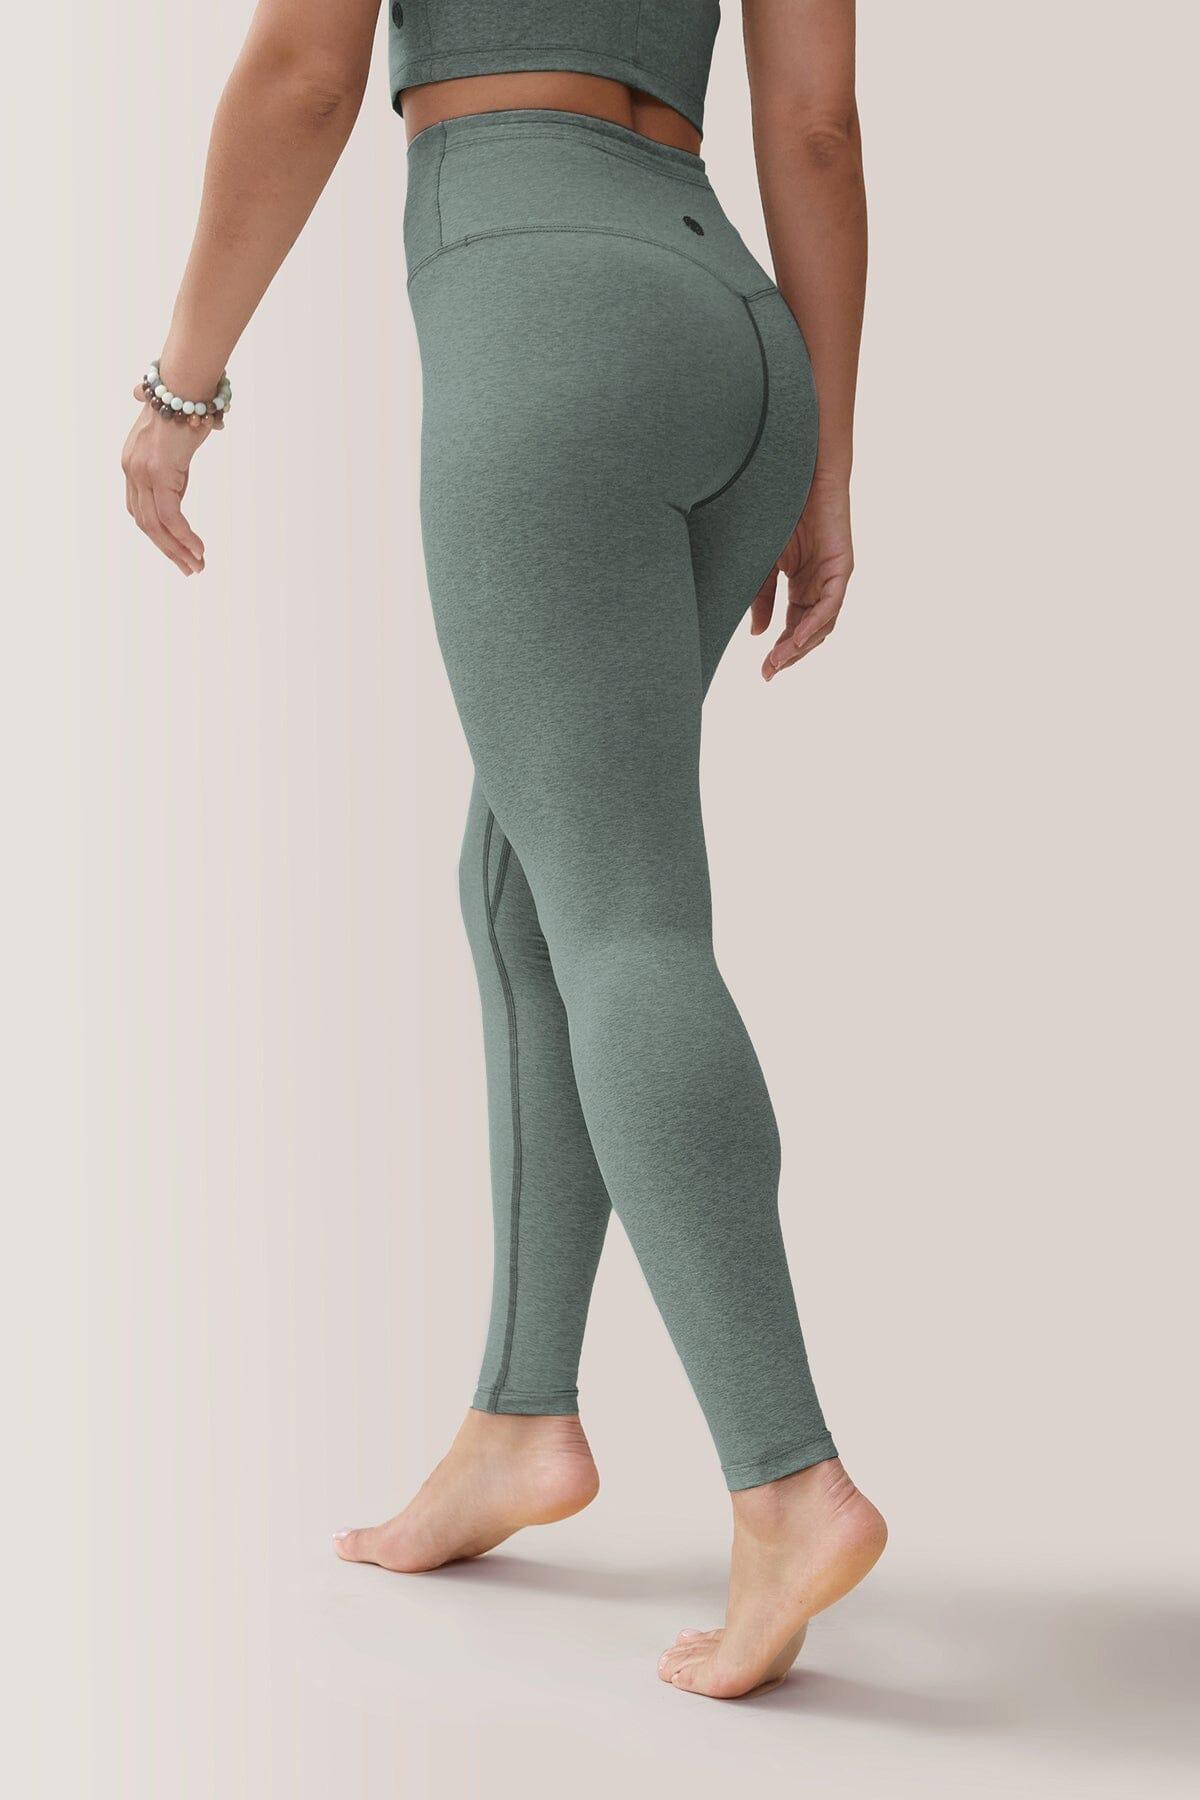 Femme qui porte les leggings taille-haute Buttery Soft BFF de Rose Boreal./ Womean wearing the Buttery Soft BFF High-Rise Legging from Rose Boreal. -Teal